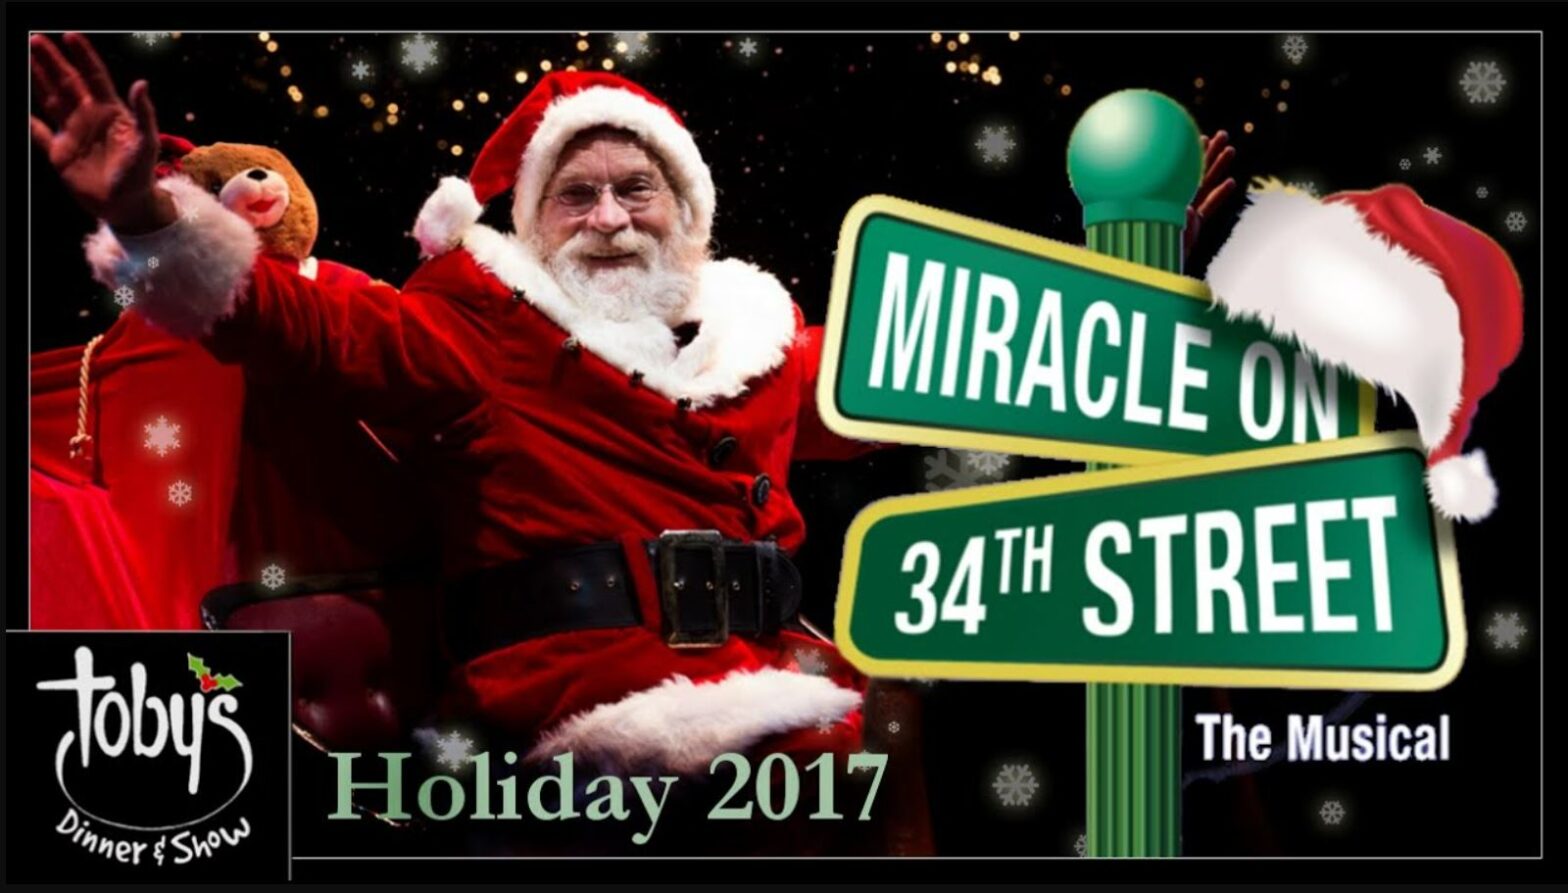 Toby’s Dinner Theatre Presents MIRACLE ON 34th STREET – Columbia, MD